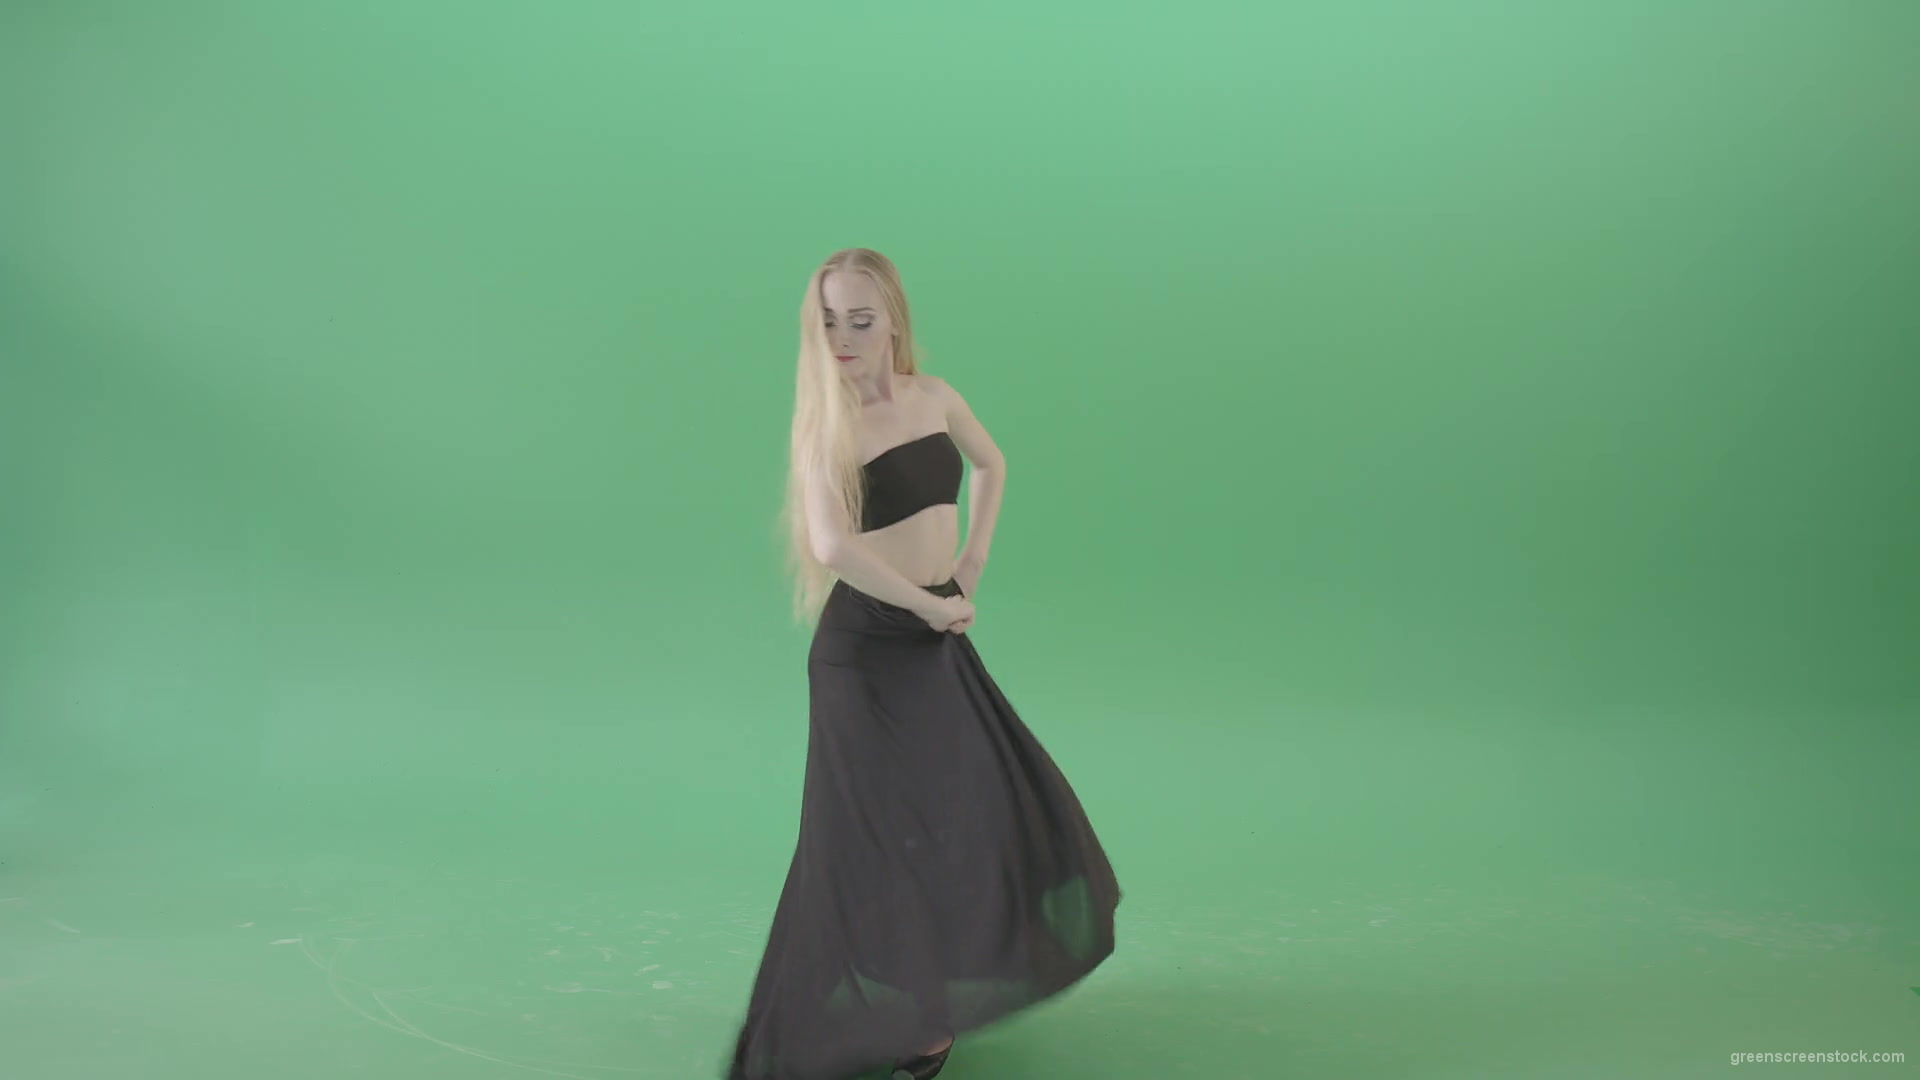 Hot-passion-ballet-girl-in-black-dress-dancing-on-green-screen-4K-Video-Footage-1920_008 Green Screen Stock